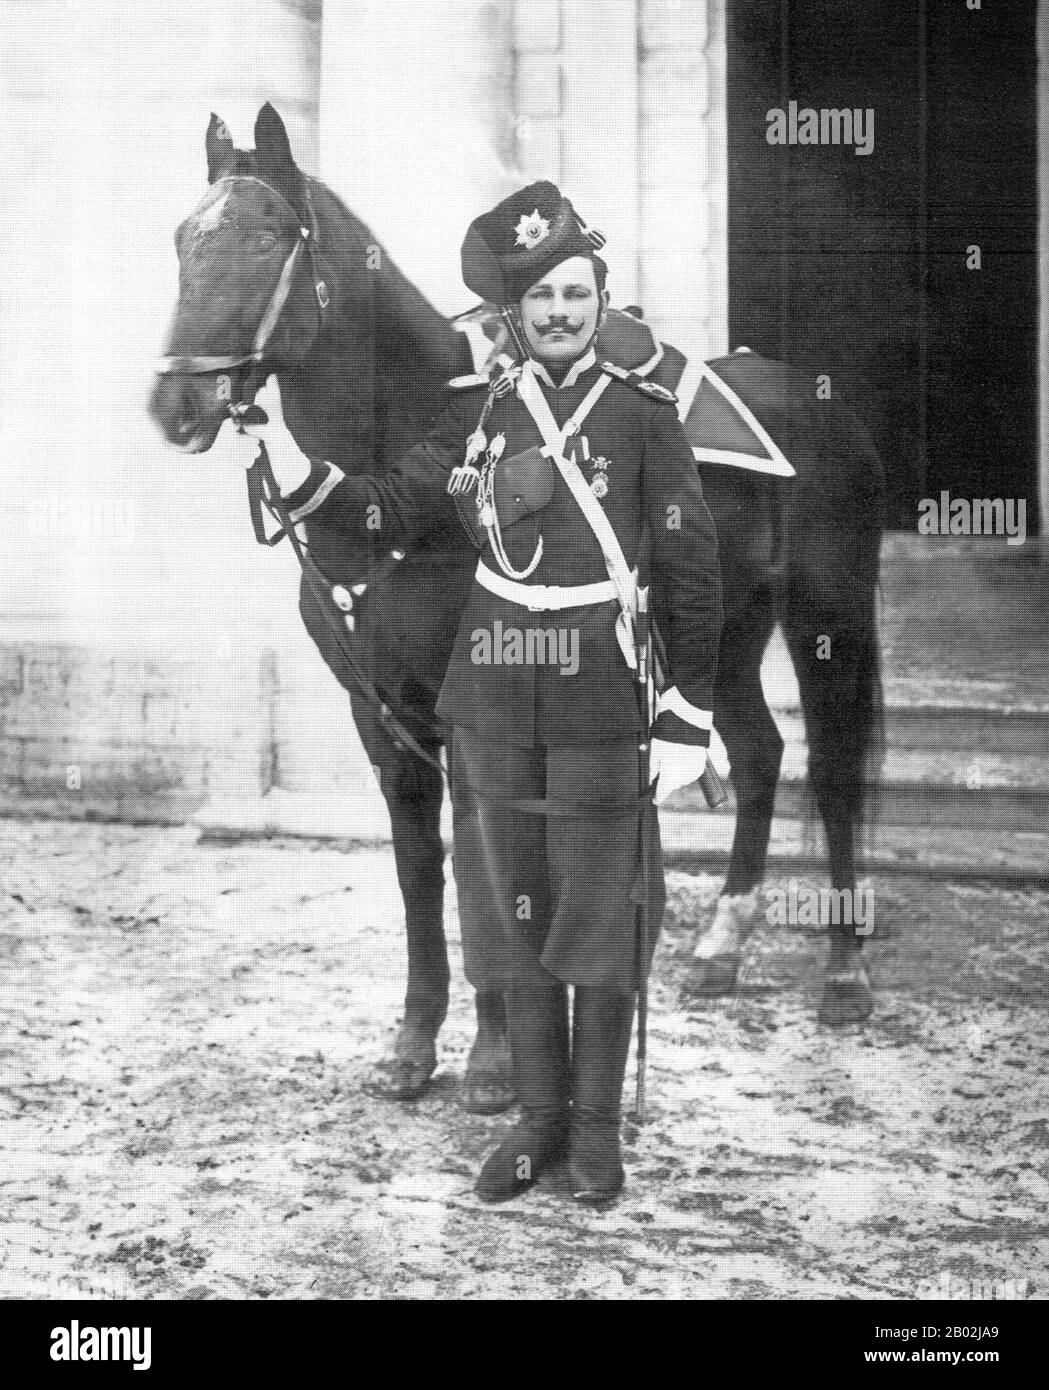 At the outbreak of World War I the mounted Cossacks made up 38 regiments, plus some infantry battalions and 52 horse artillery batteries. By 1916 their wartime strength had expanded to 160 regiments plus 176 independent sotnias (squadrons), the latter employed as detached units. While about a third of the regular Russian cavalry was dismounted in 1916 to serve as infantry, the Cossack arm remained essentially unaffected by modernization.  In the Russian Civil War that followed the October Revolution, various Cossacks supported each side of the conflict. Cossacks formed the core of the White Ar Stock Photo